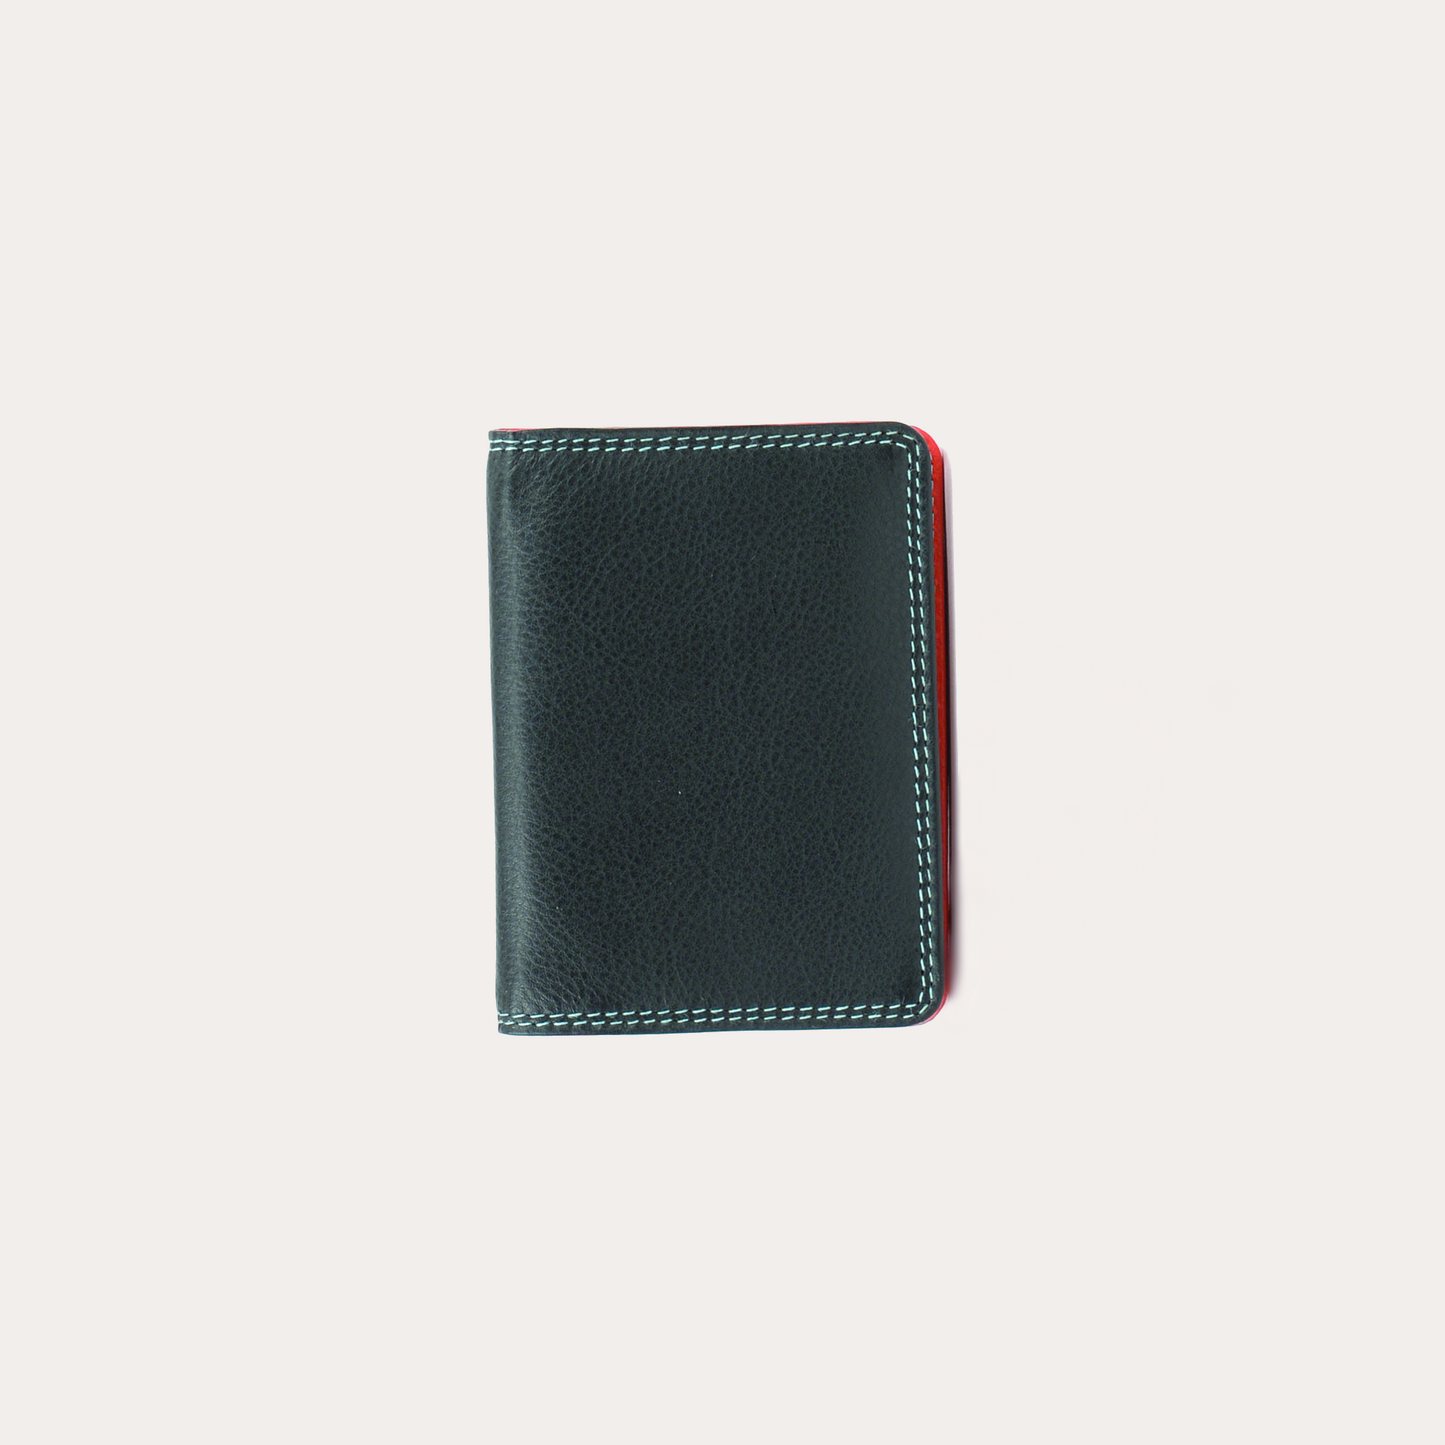 Black Tropical Leather Credit Card or Bus Pass Holder